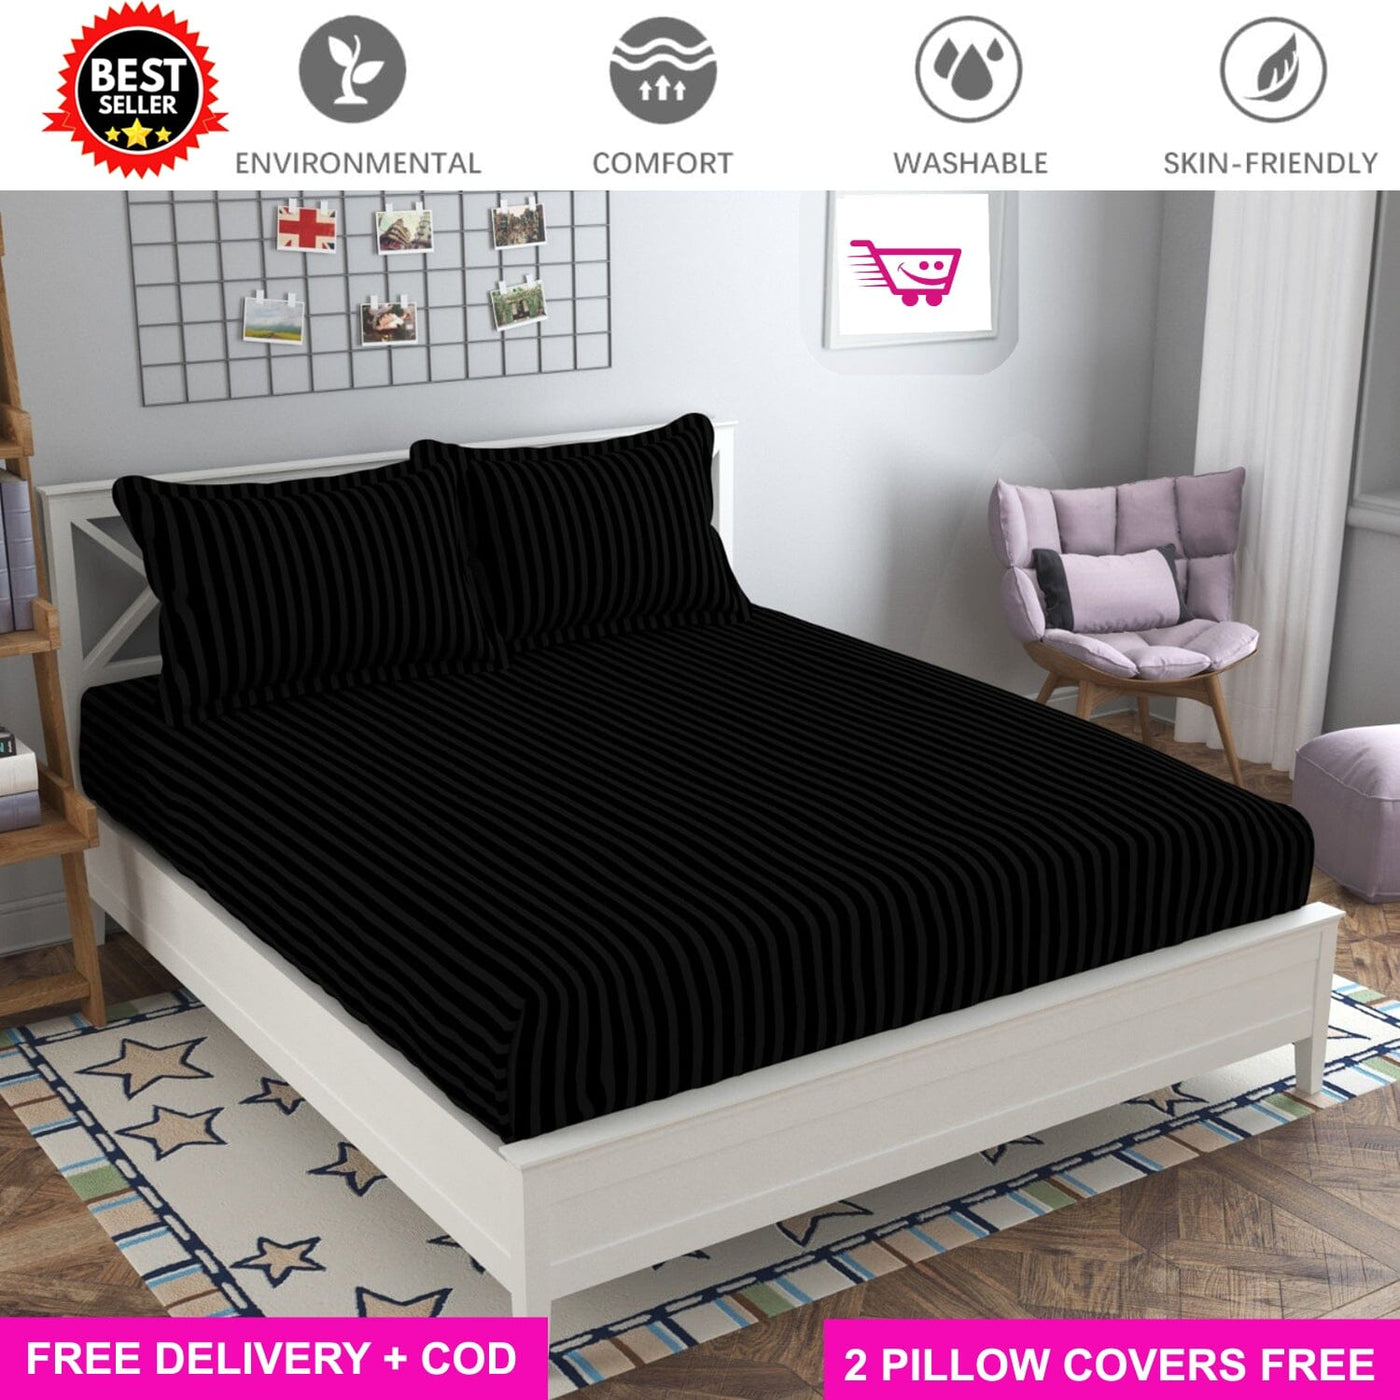 Black Satin Full Elastic Fitted Bedsheet with 2 Pillow Covers - King Size Bed Sheets Great Happy IN 